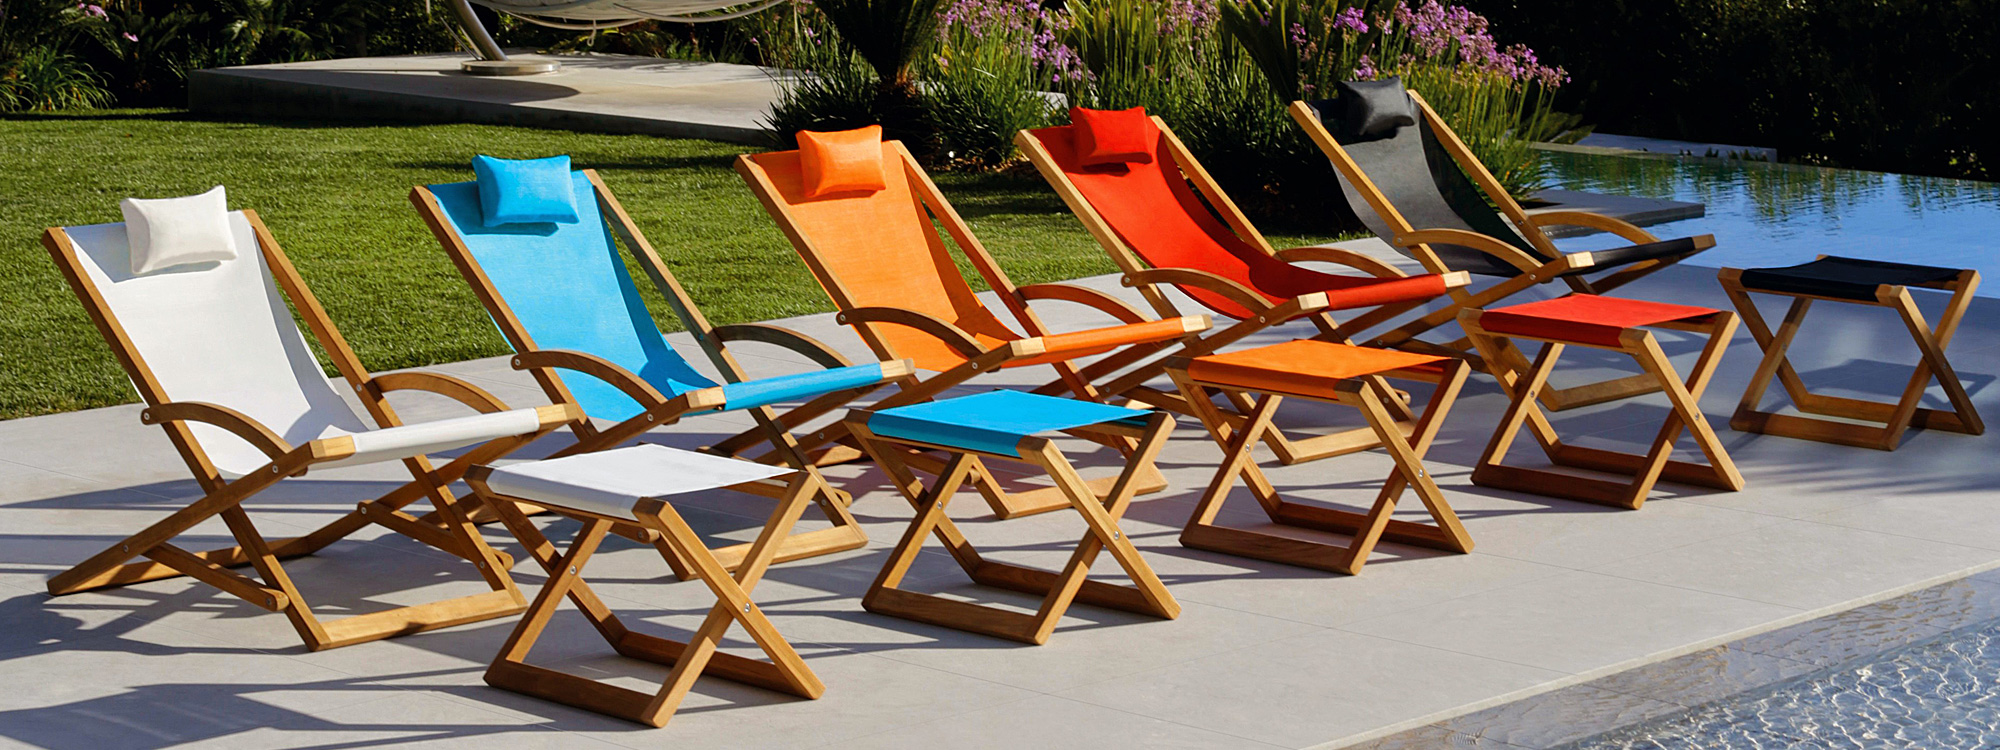 Image of line of Beacher deck chairs in multiple colors by Royal Botania, alongside swimming pool